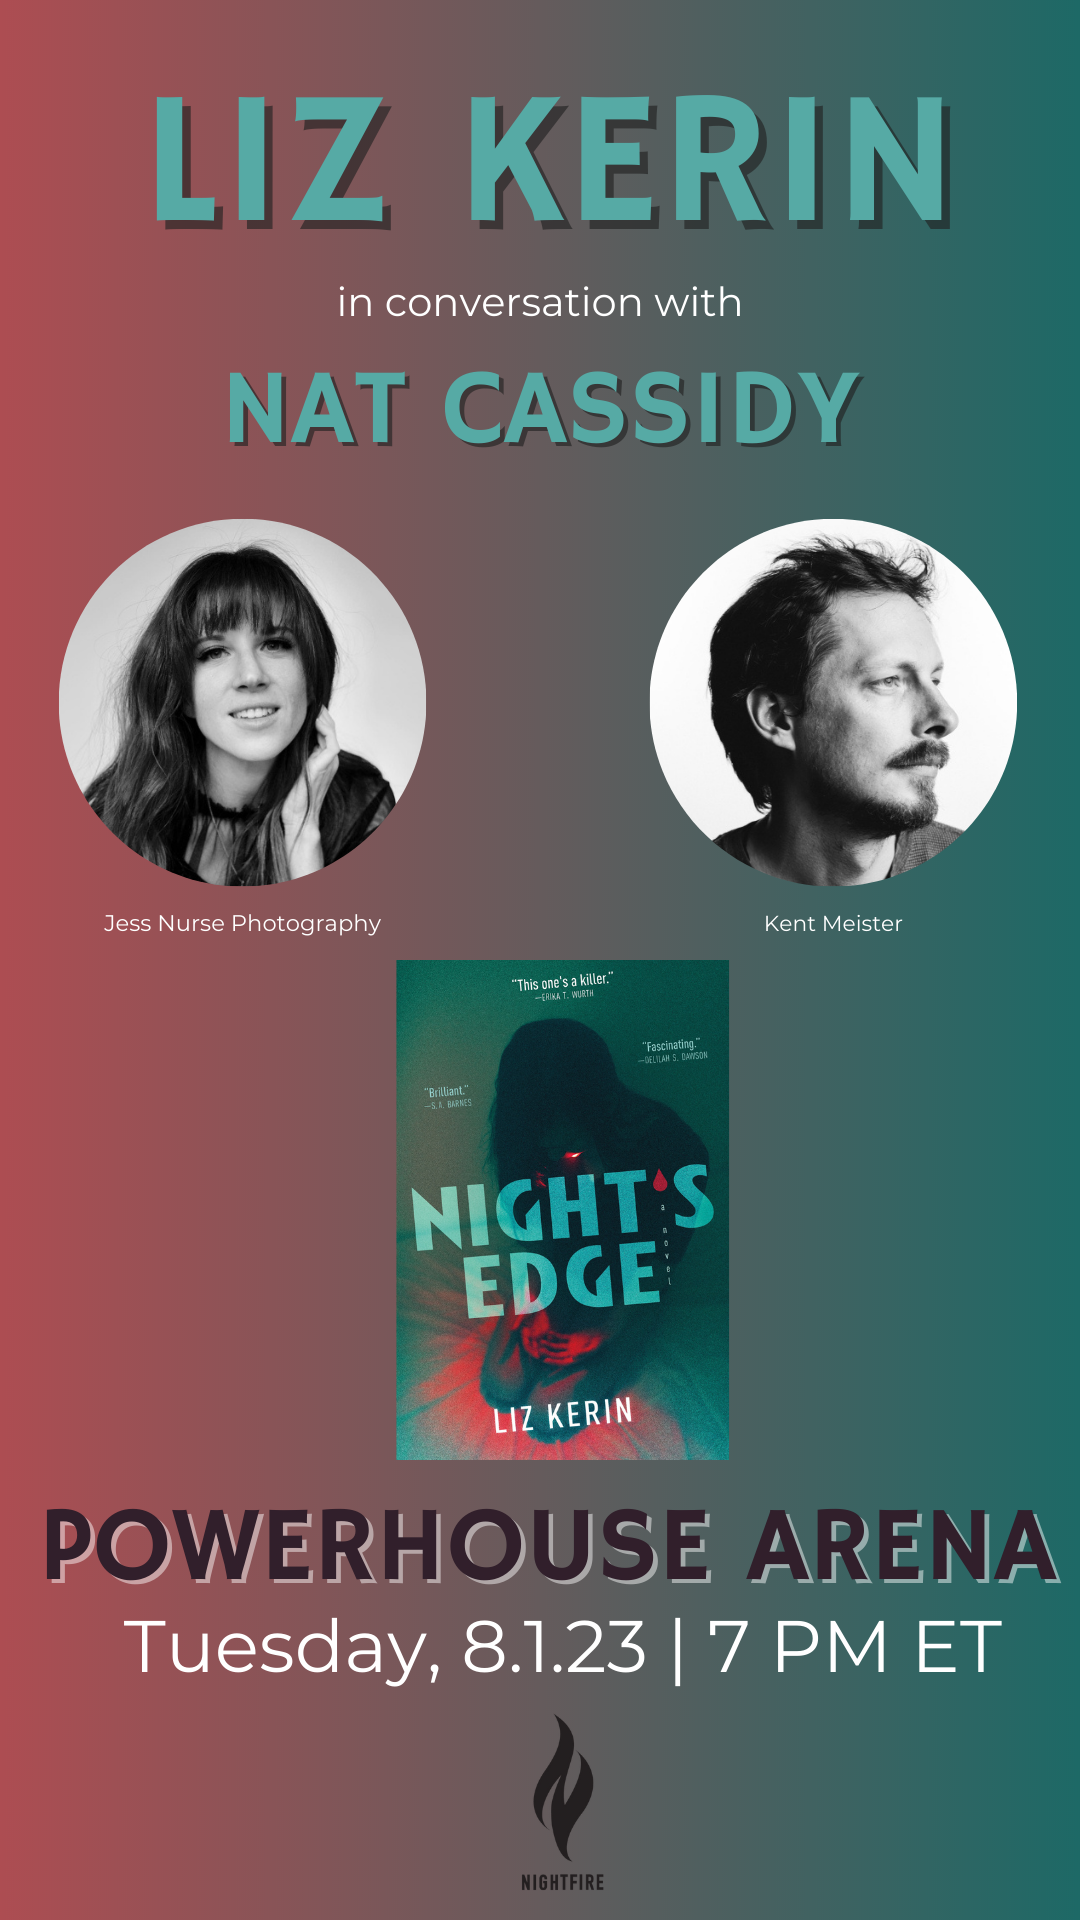 Book Launch: Night's Edge by Liz Kerin in conversation with Nat Cassidy